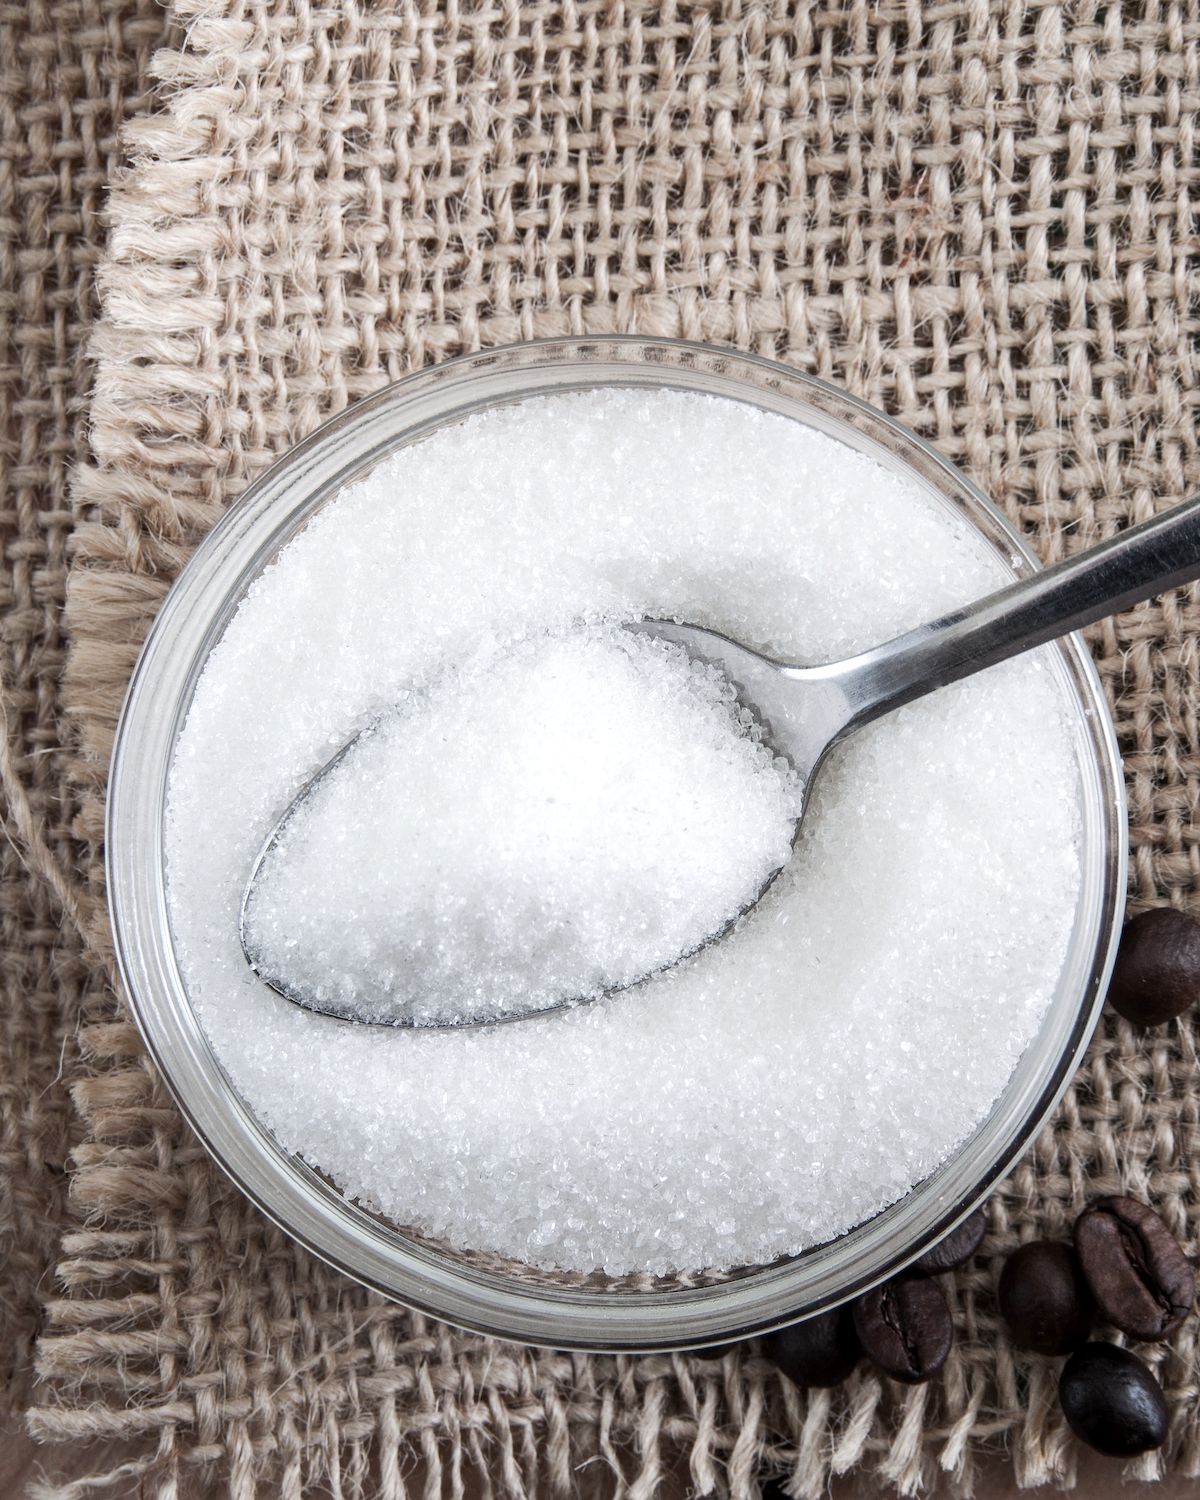 Spoon in a glass bowl of sugar, close up